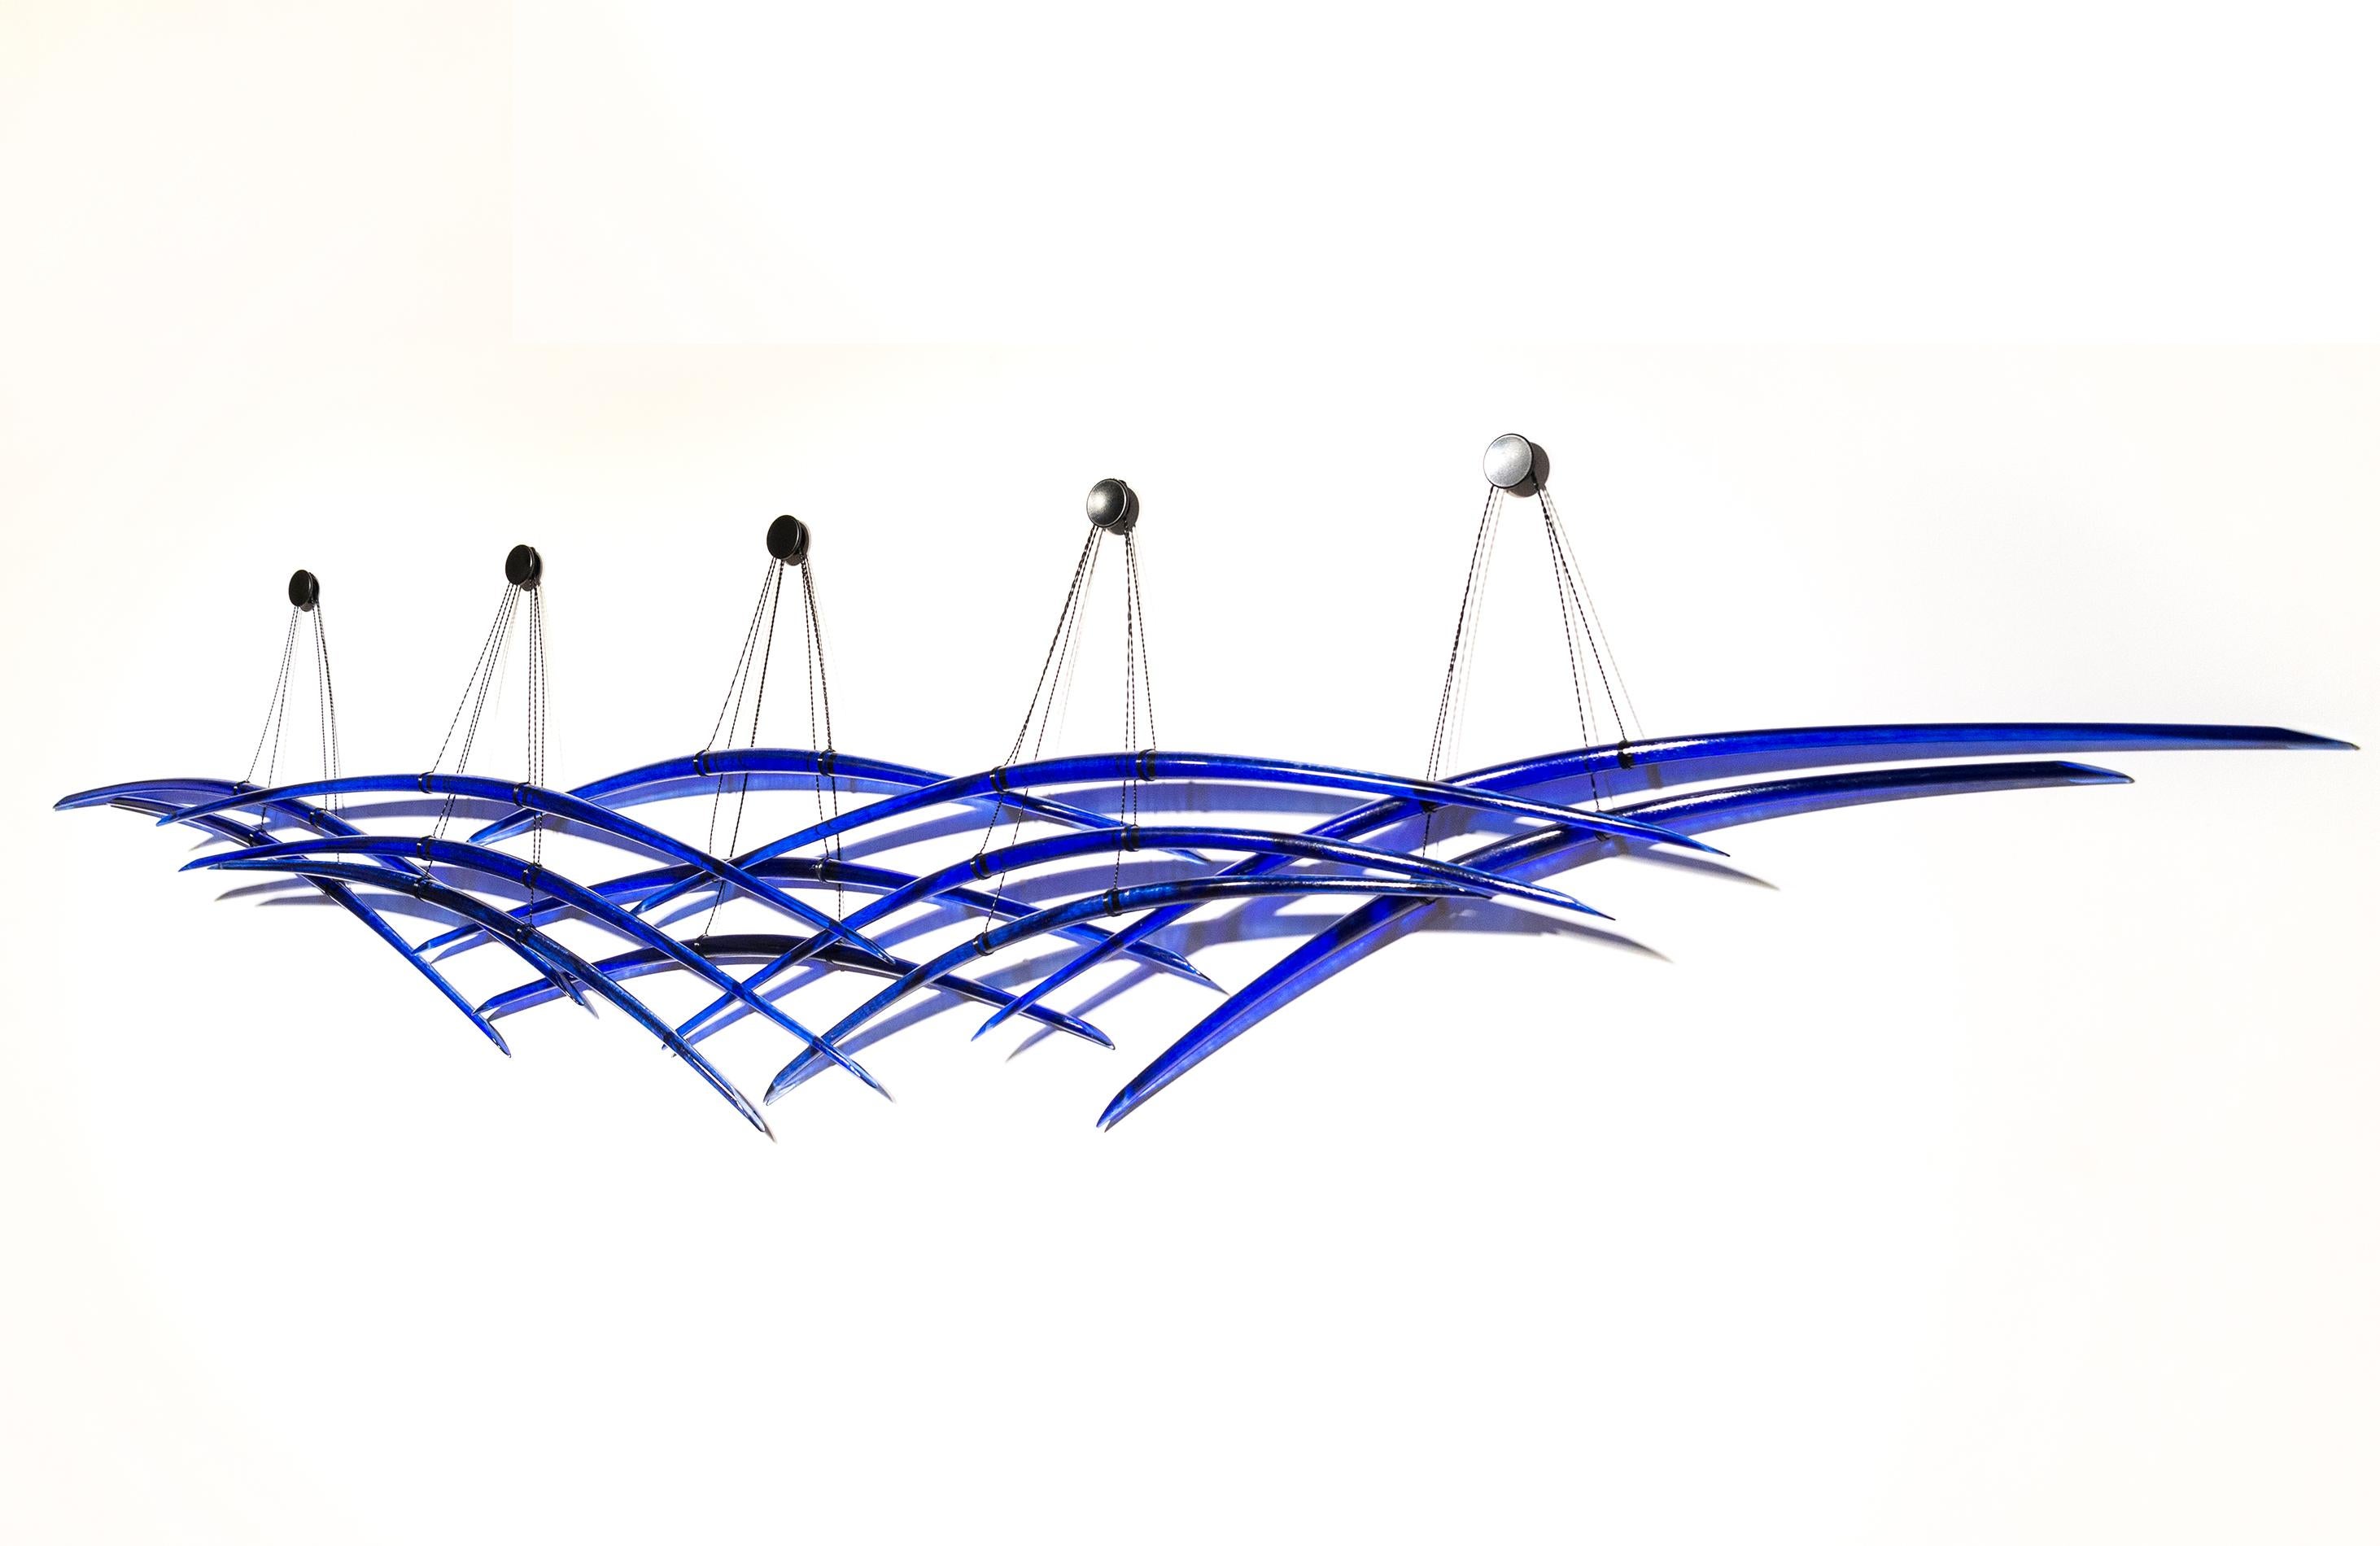 Probability Deep Blue 4 - elegant, curved, abstract, glass, wall sculpture - Sculpture by John Paul Robinson